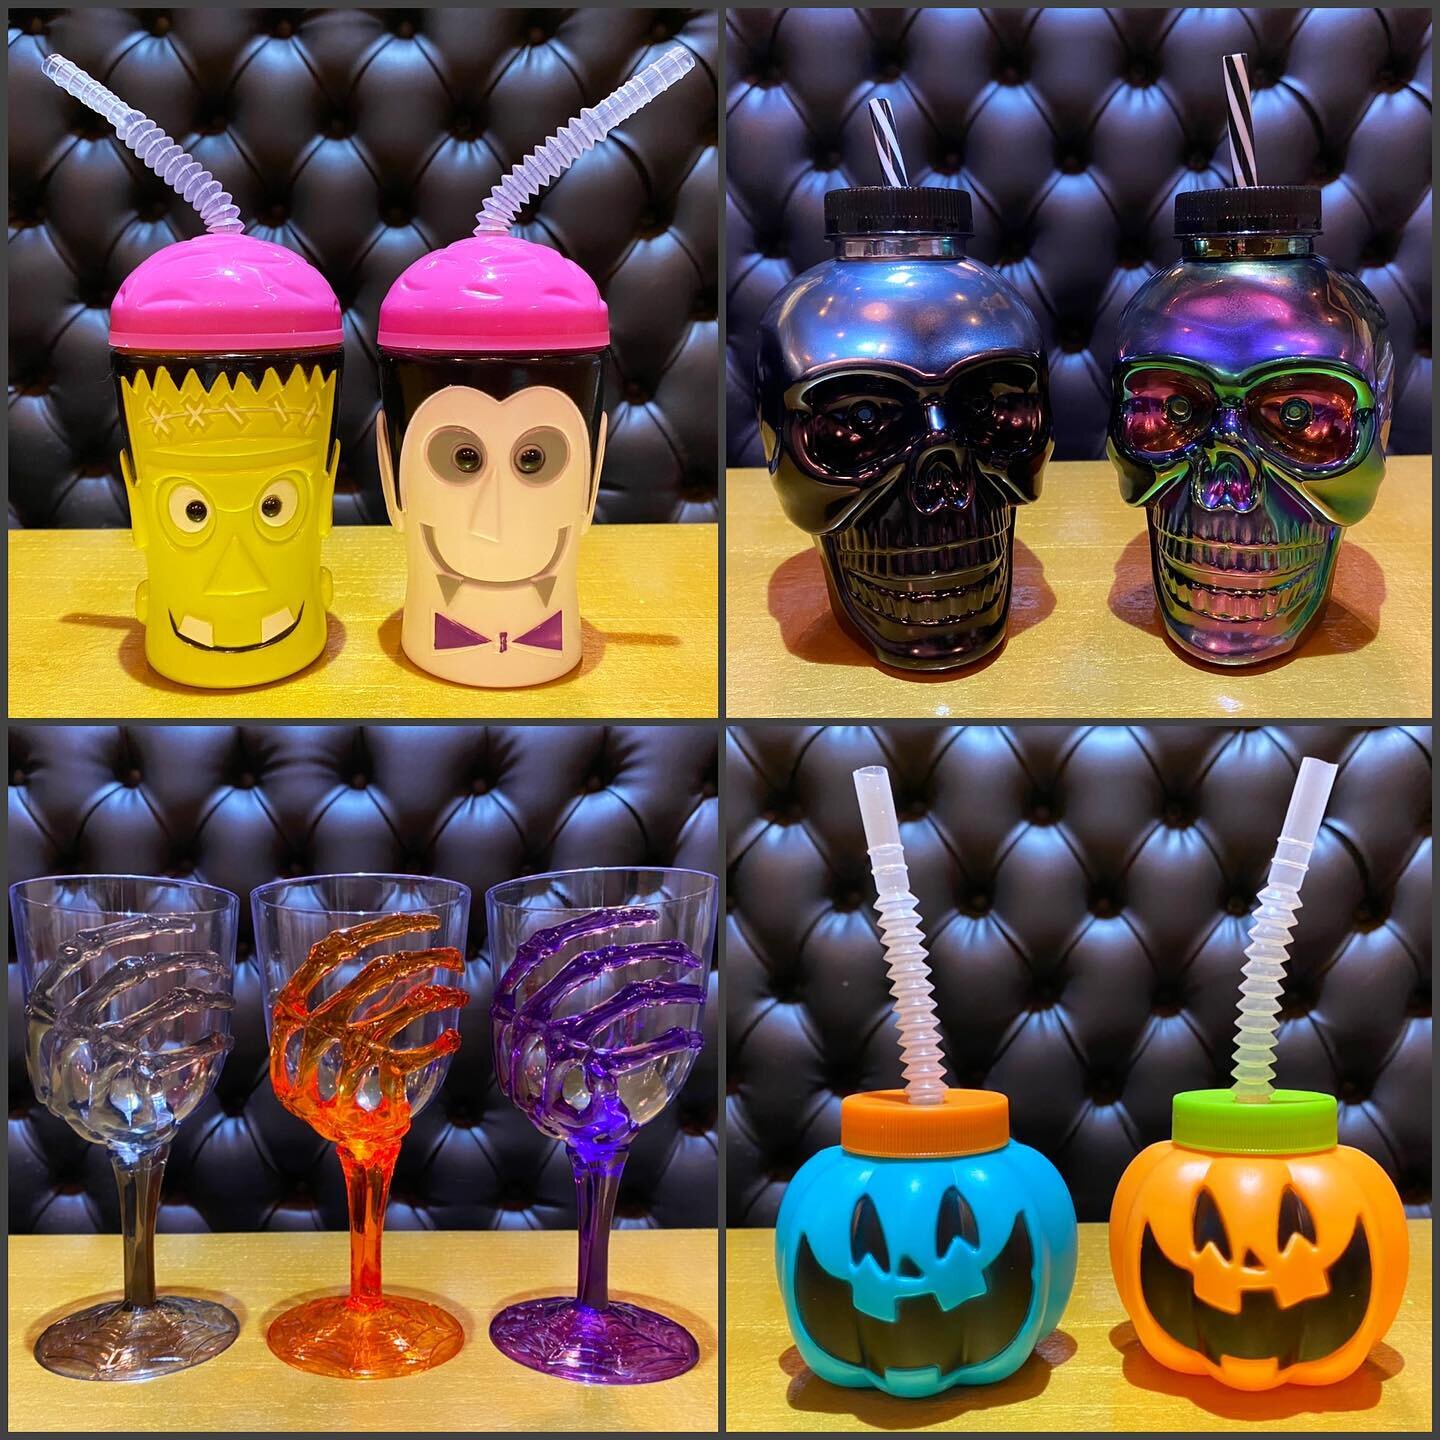 It&rsquo;s #ThirstyThursday and October 1st so you know what that means...time to have a cocktail in a Dracula Sippy on the Halloween patio with someone and see if they turn into a ghost. 👻

COCKTAILS ALA MODE 🎉

📲Go to www.theuesnyc.com or
Call 6